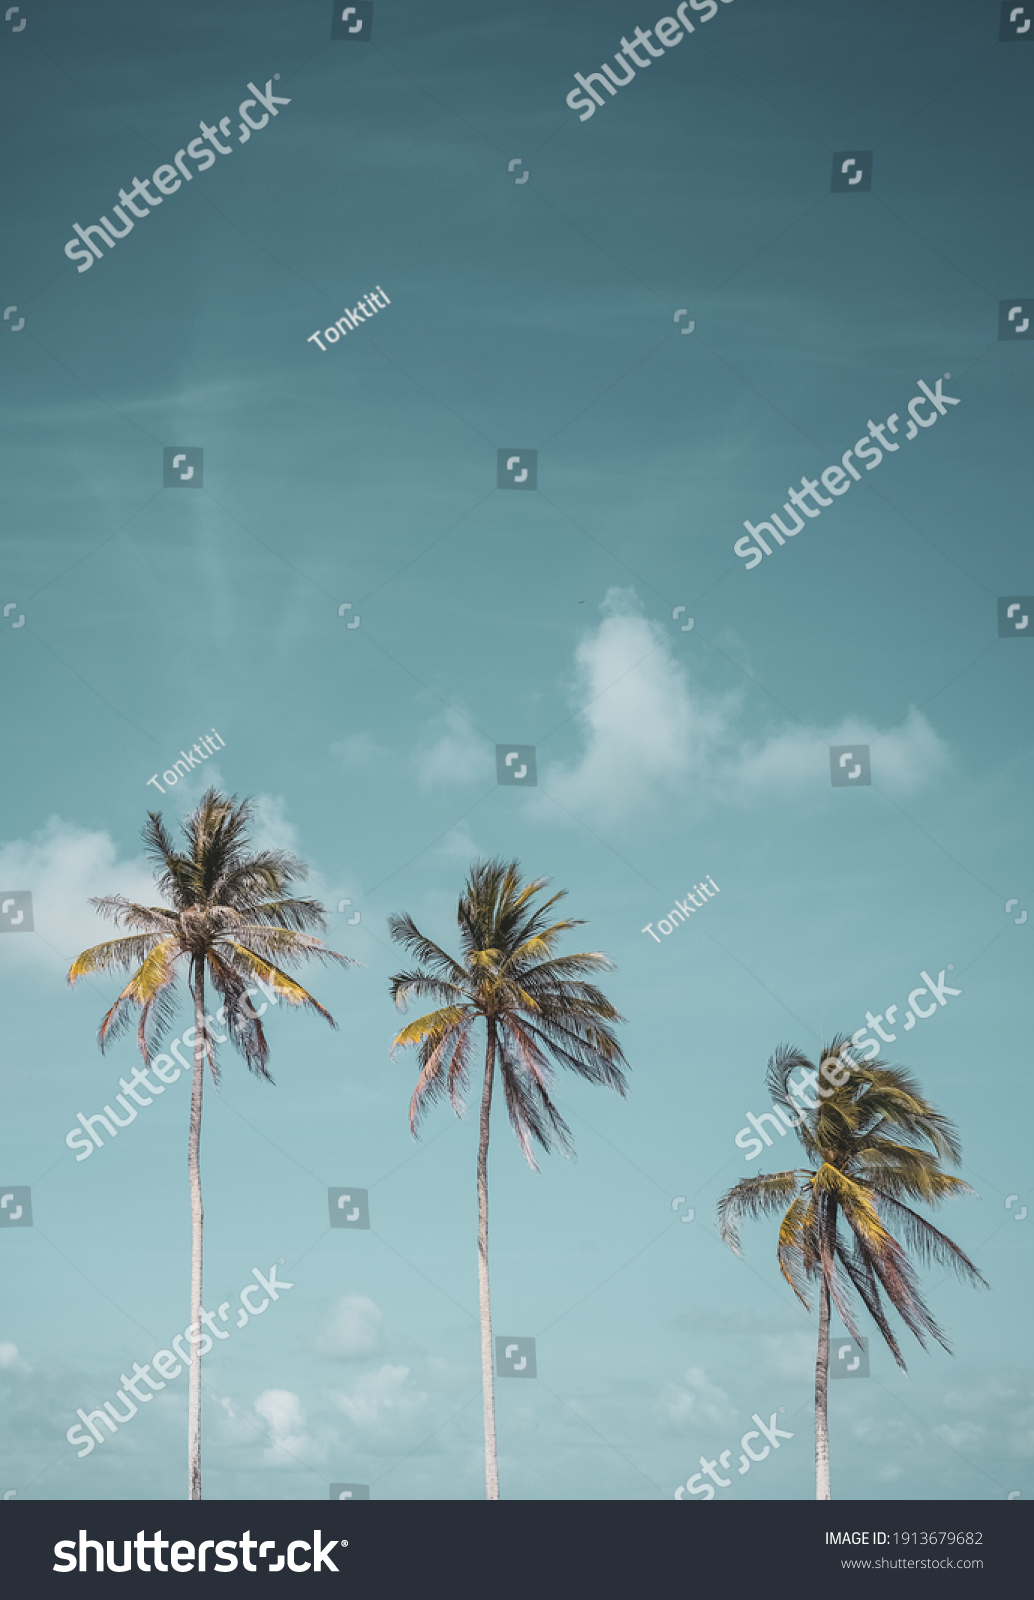 Tropical palm tree with blue sky and cloud abstract background. Summer vacation and nature travel adventure concept. Pastel tone filter effect color style. #1913679682